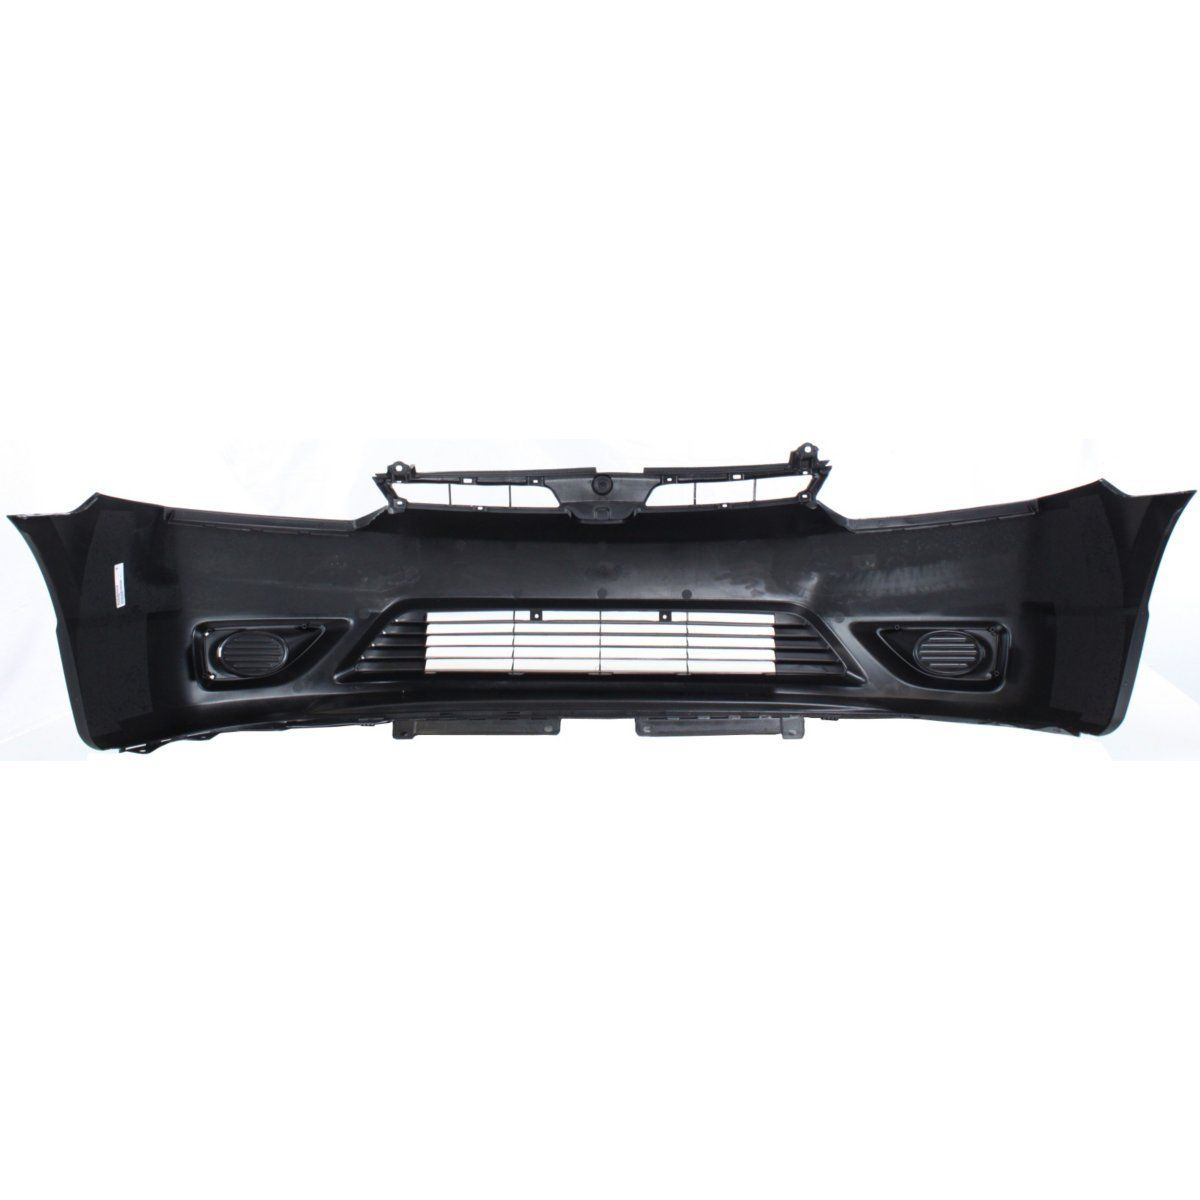 2006-2008 HONDA CIVIC Front Bumper Cover 2dr coupe Painted to Match